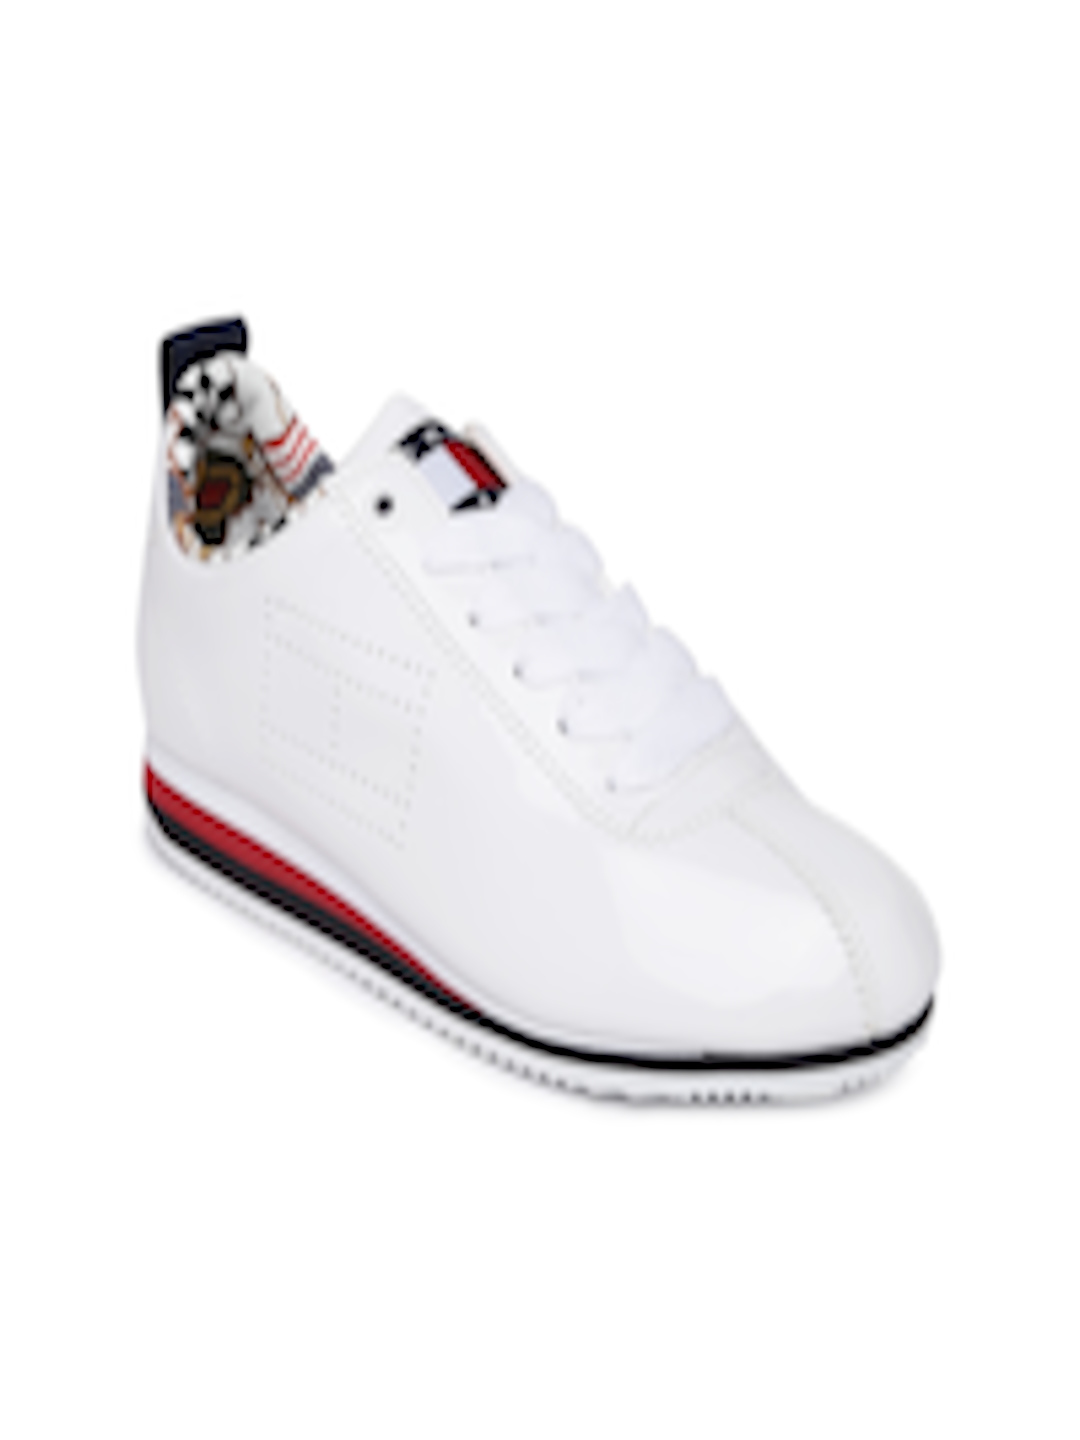 Buy Tommy Hilfiger Women White Sneakers - Casual Shoes for Women